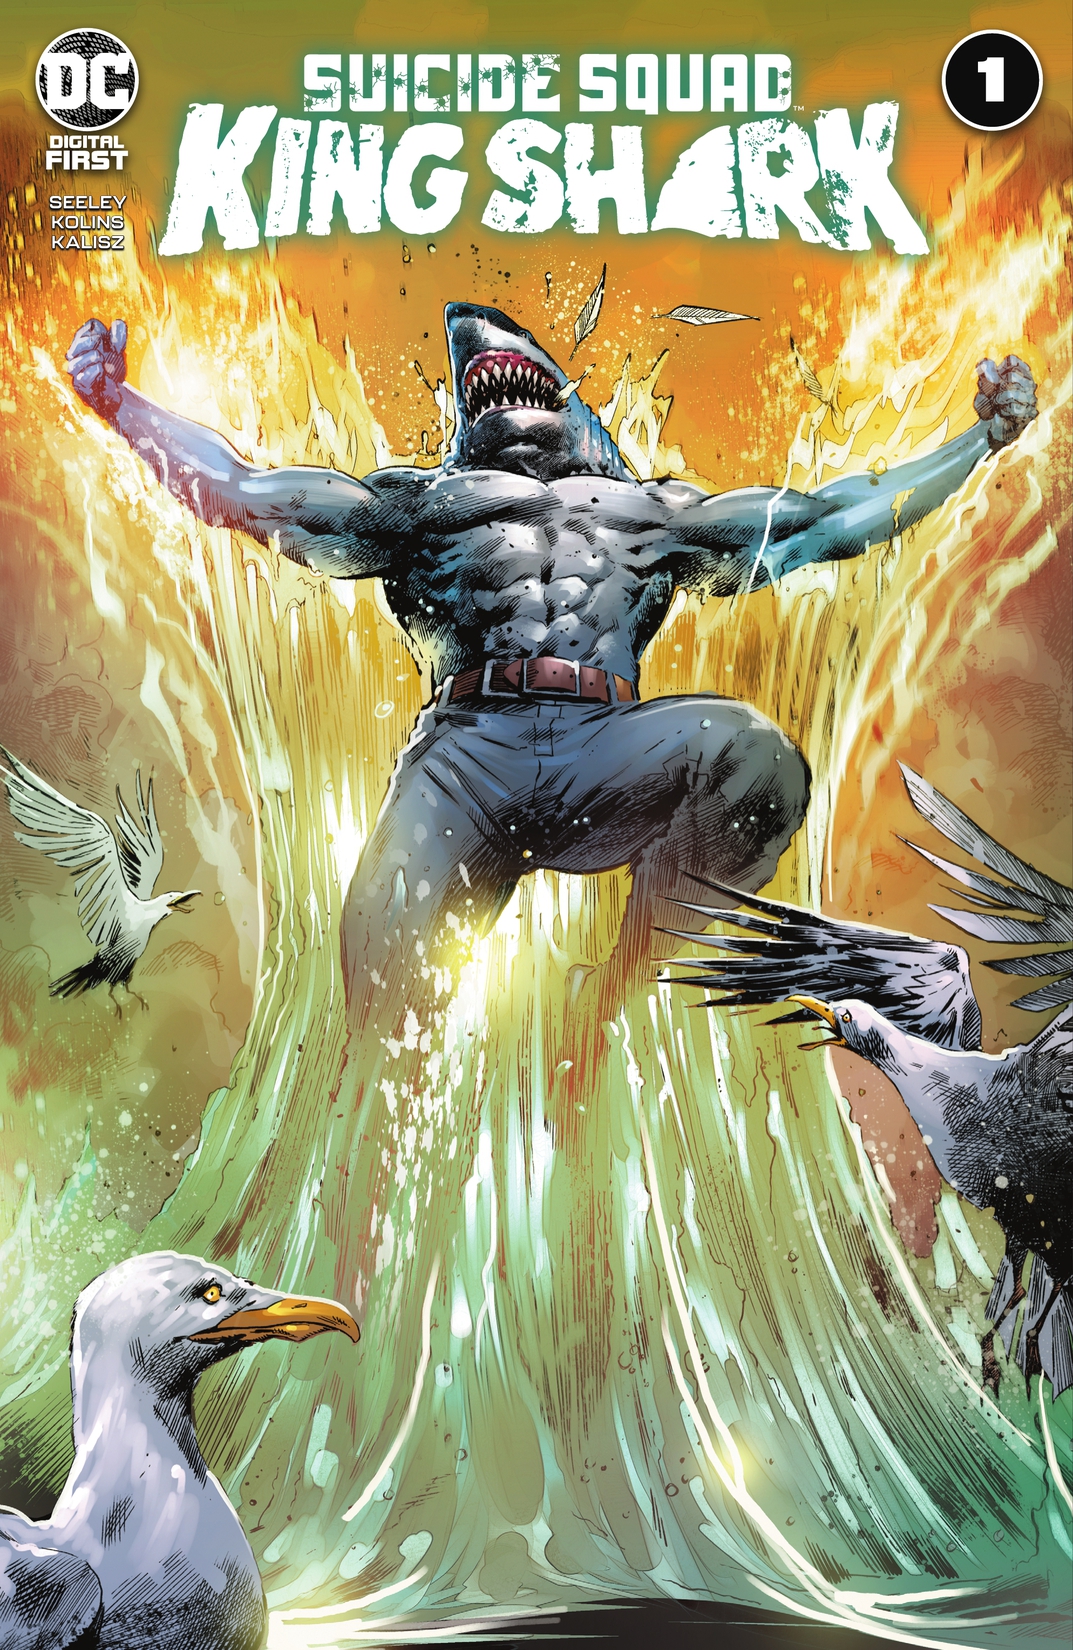 Suicide Squad: King Shark #1 preview images